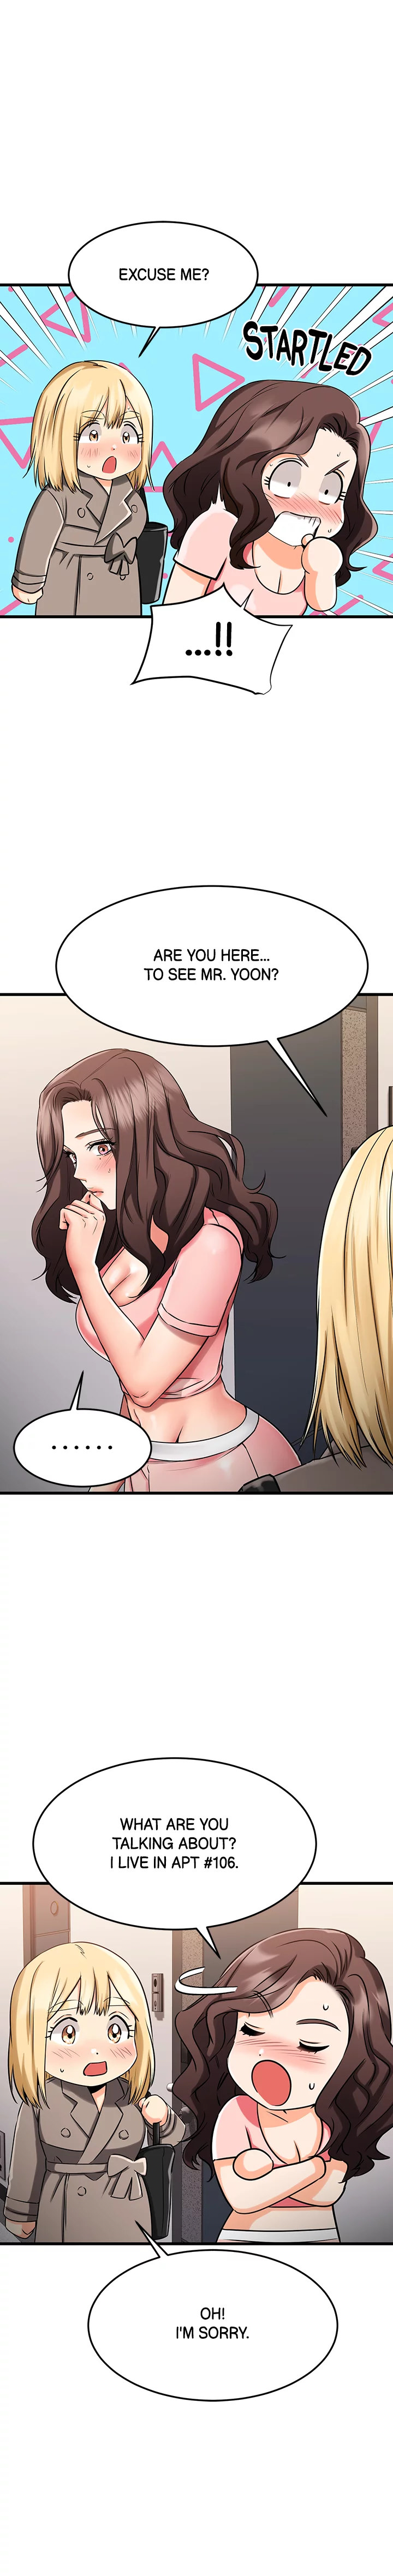 My Female Friend Who Crossed The Line - Chapter 33 Page 5